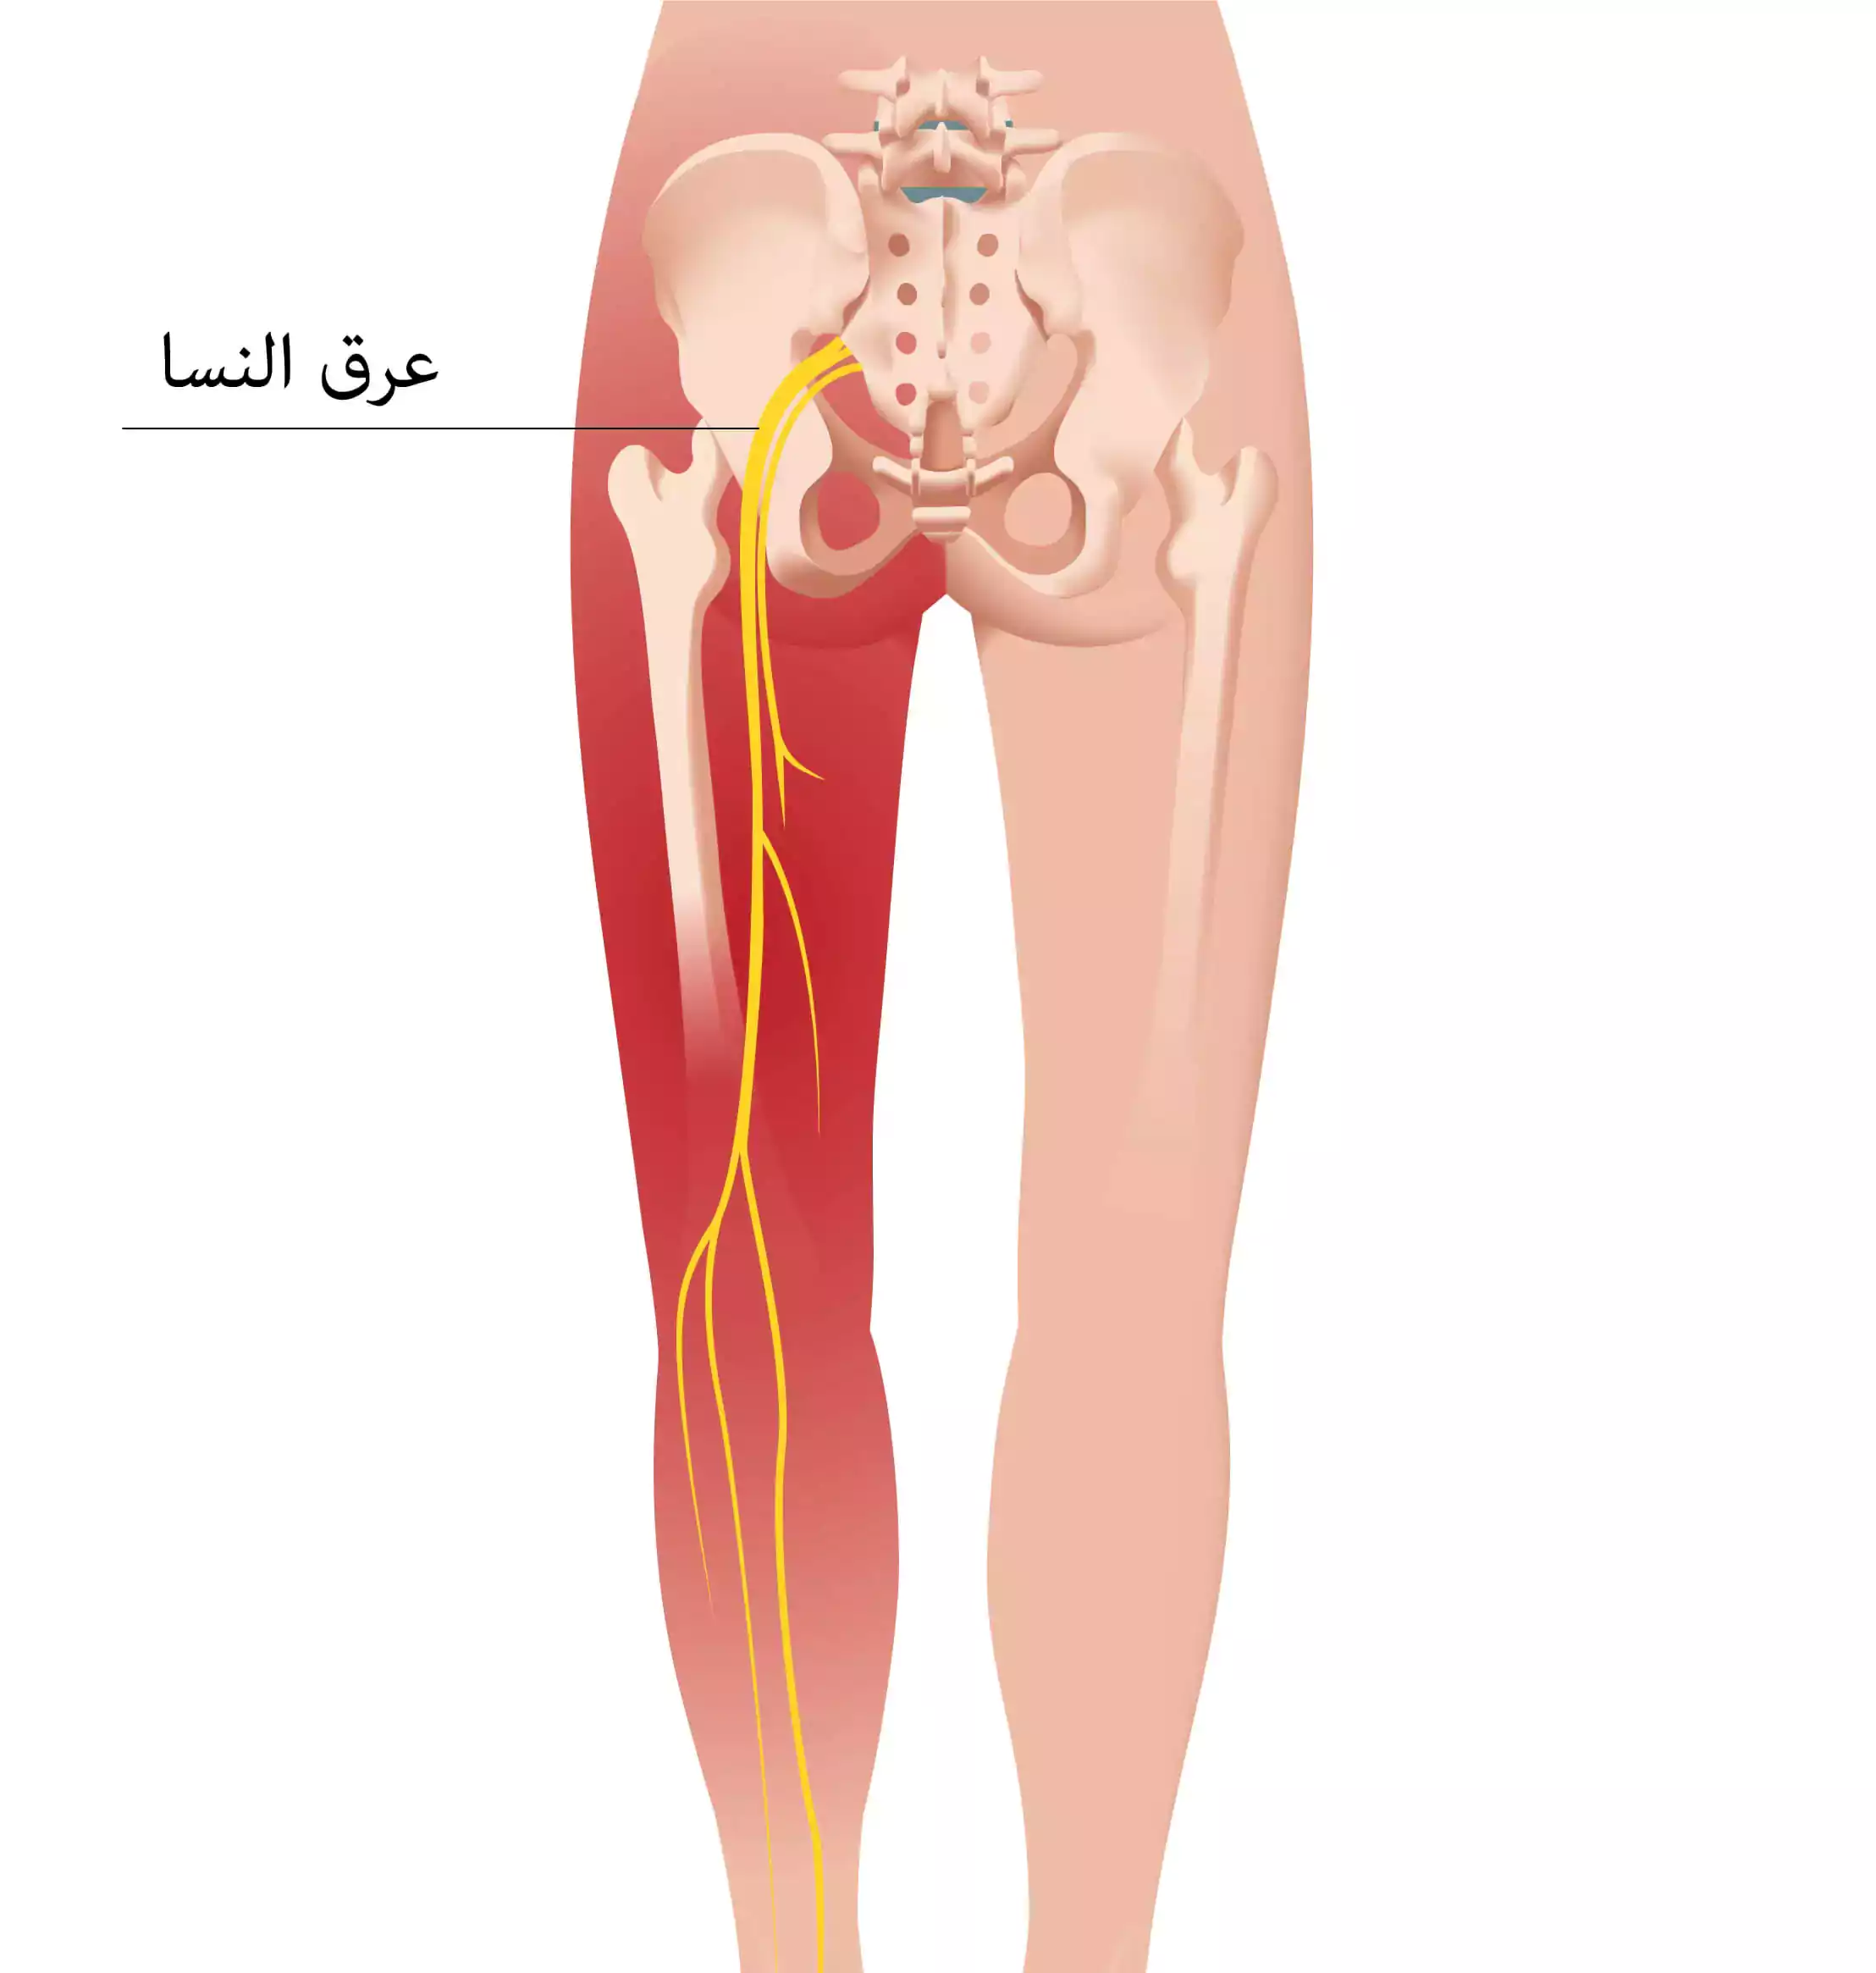 Extension of sciatica pain that extends along the path of the sciatic nerve